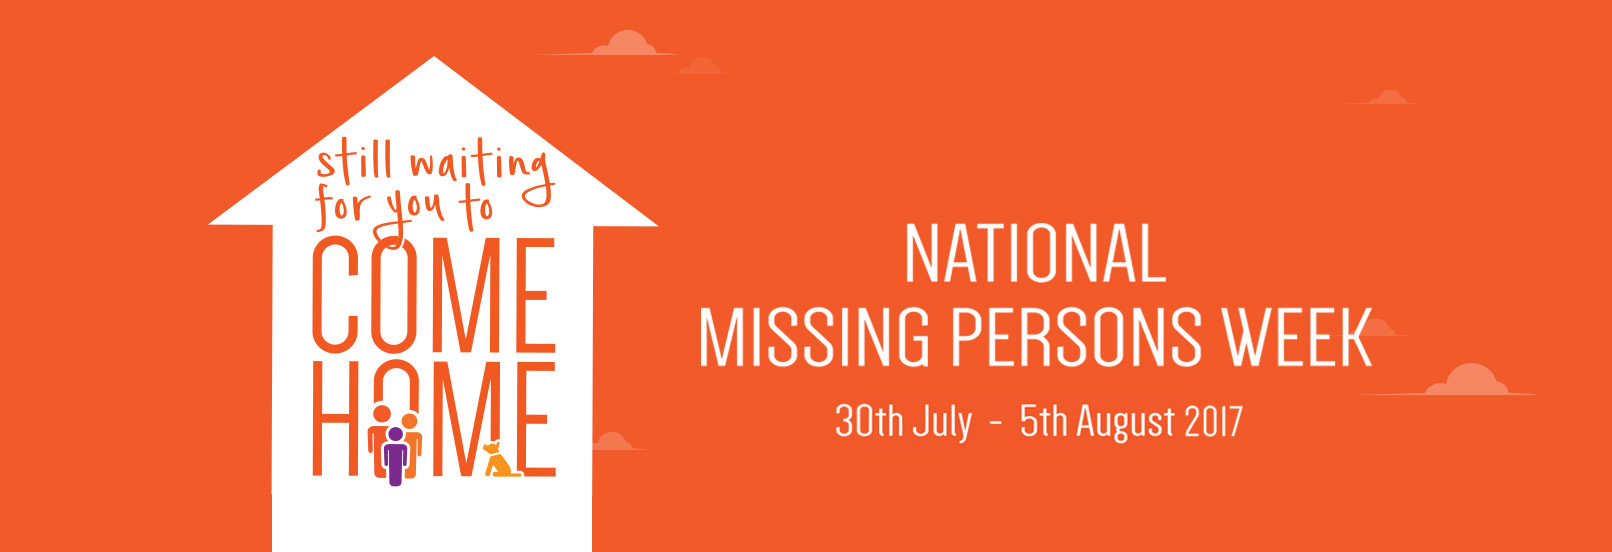 National Missing Persons Week 2017 - Still waiting for you to come home